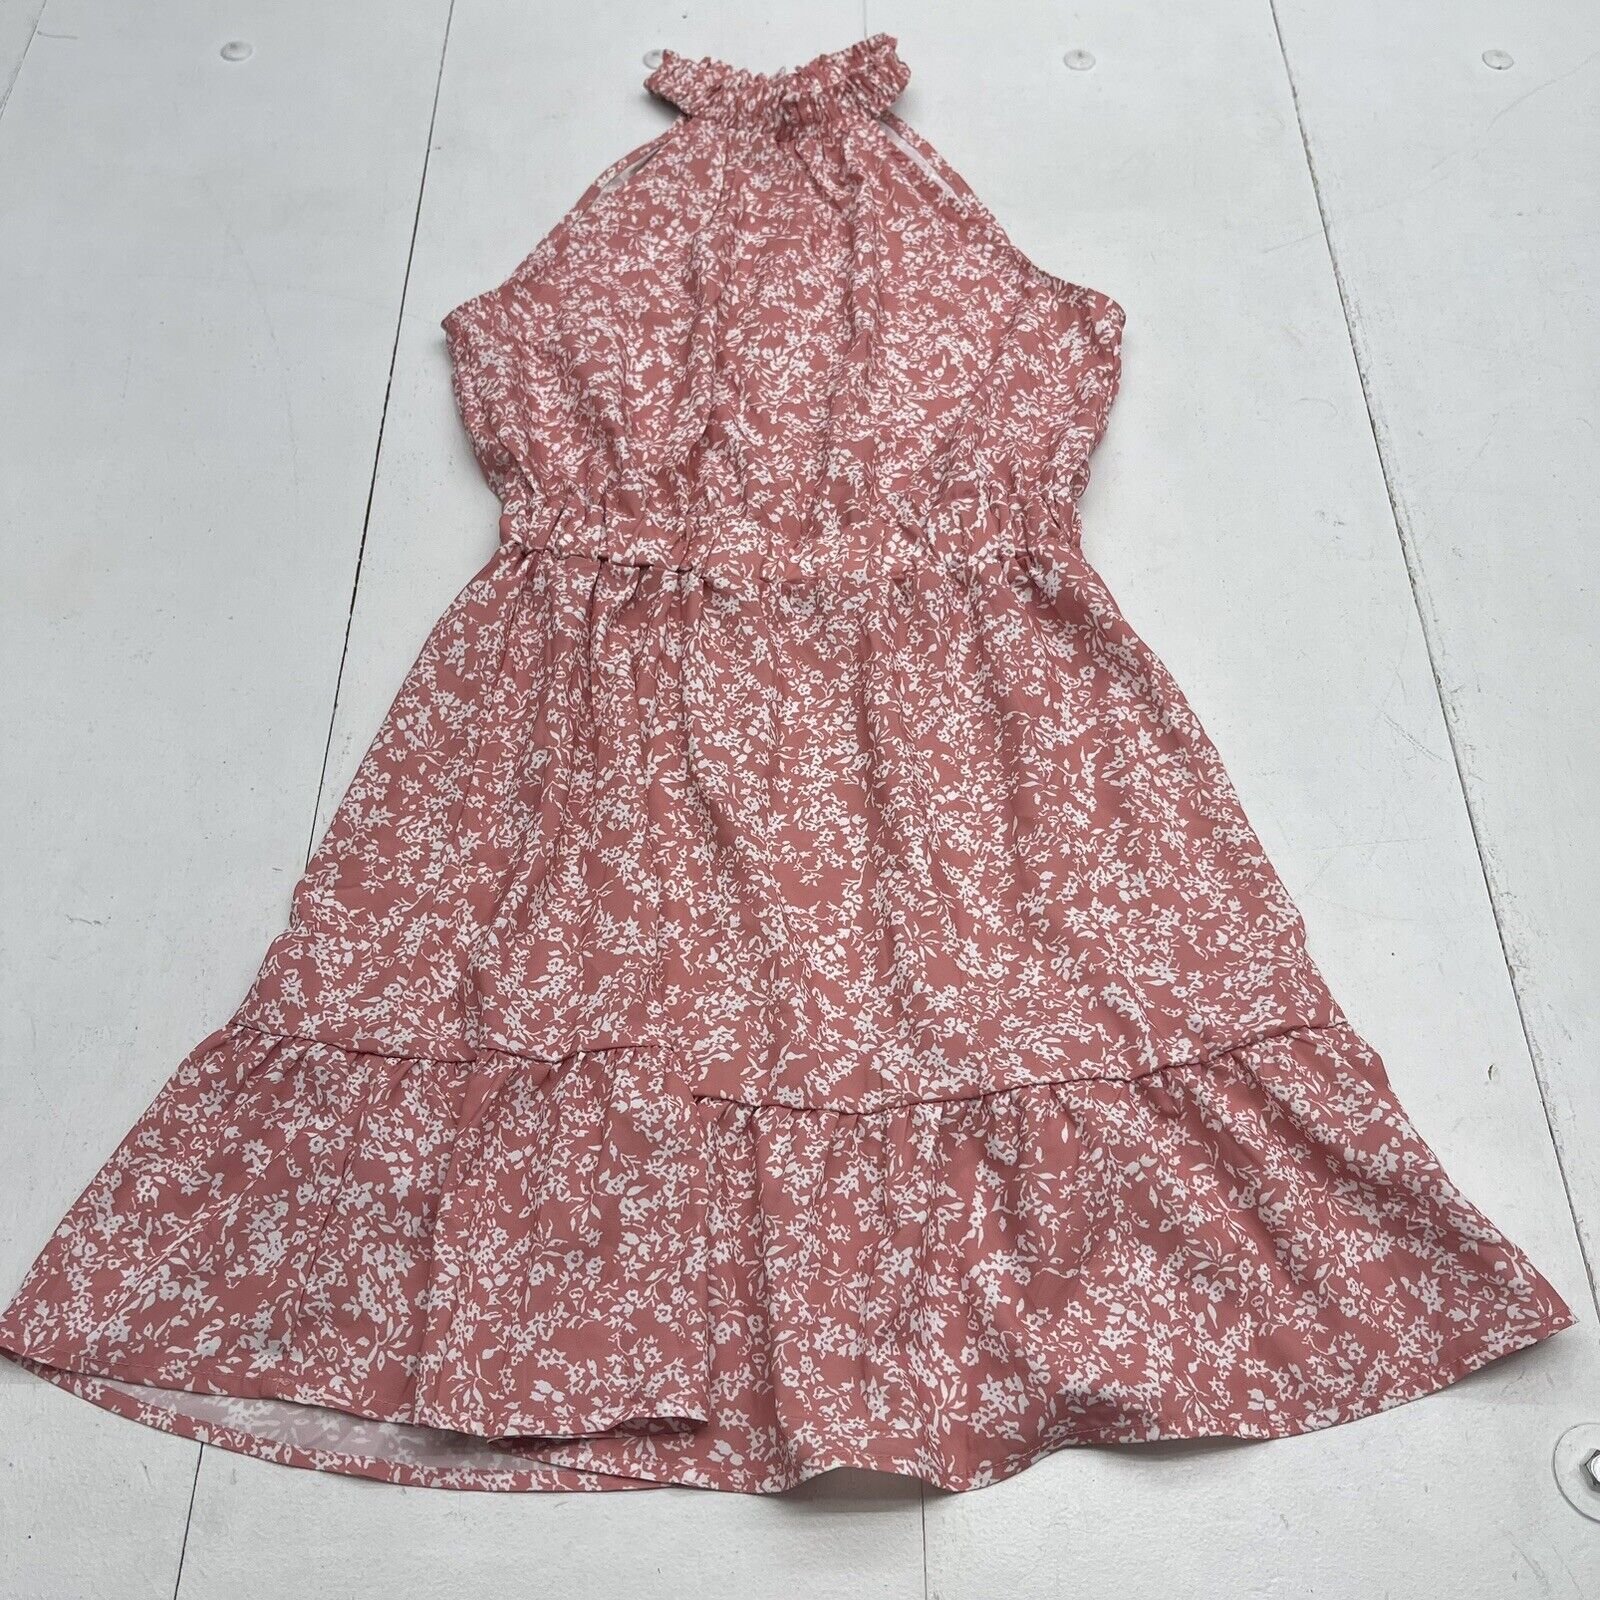 Women’s High Neck Pink Floral Dress Size Small